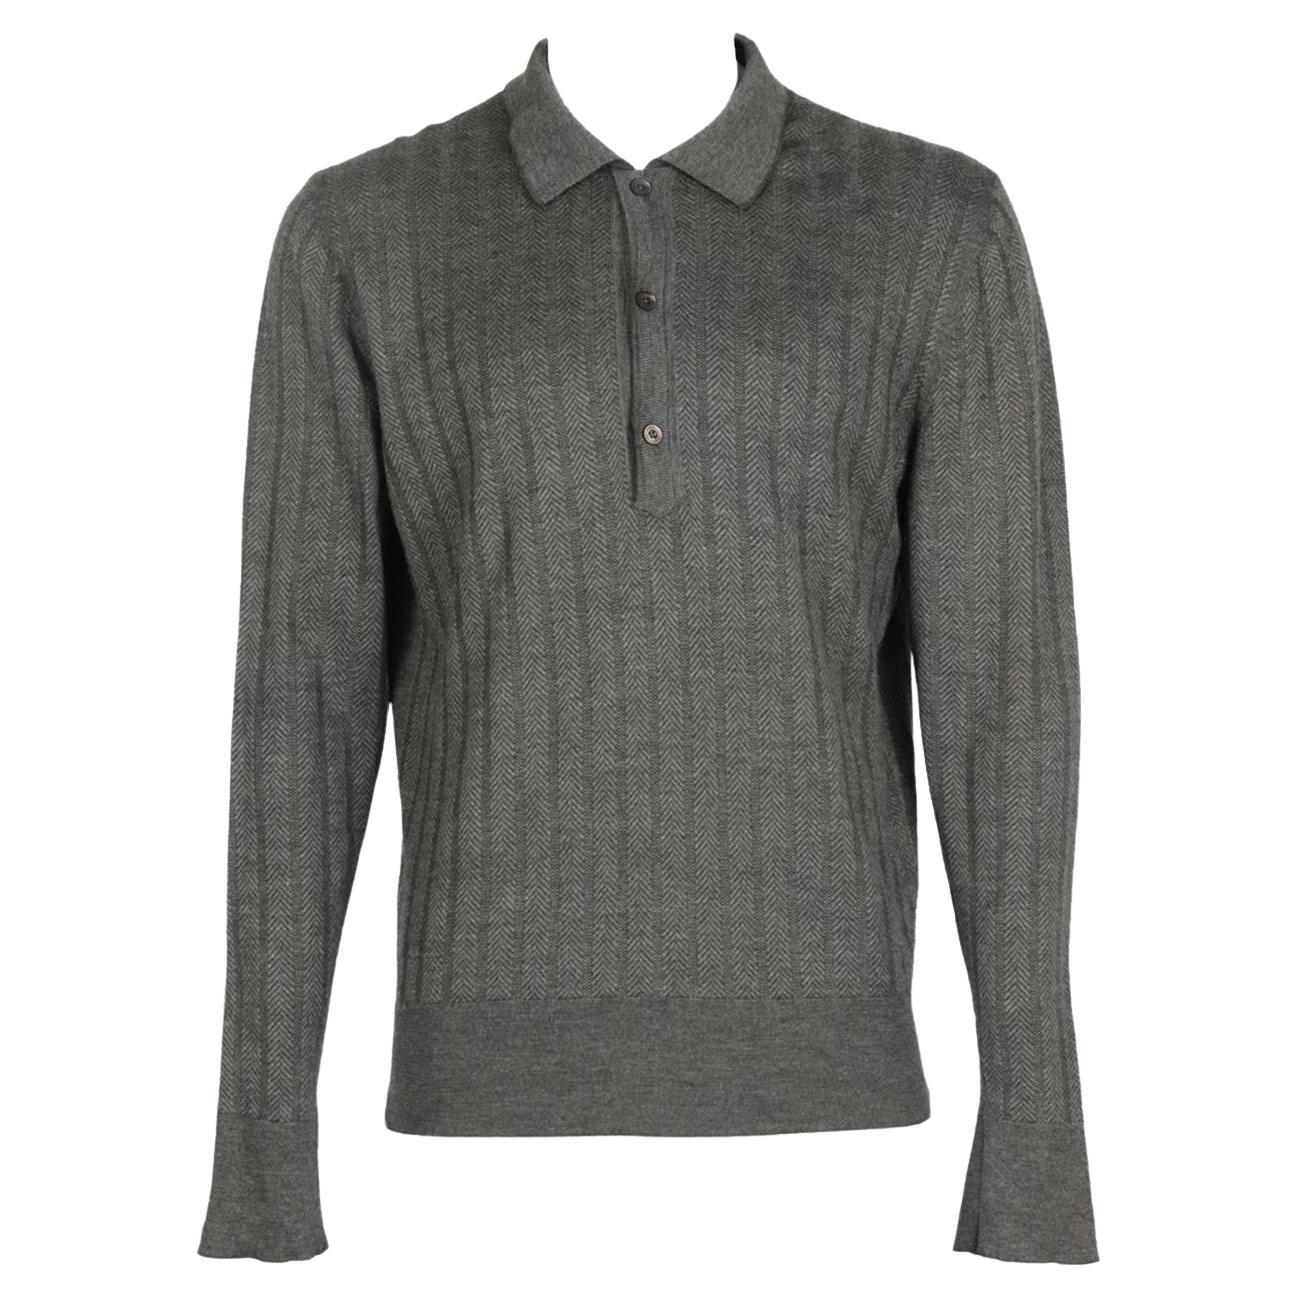 Tom Ford Men's Wool And Cashmere Blend Sweater It 48 Uk/us Chest 38